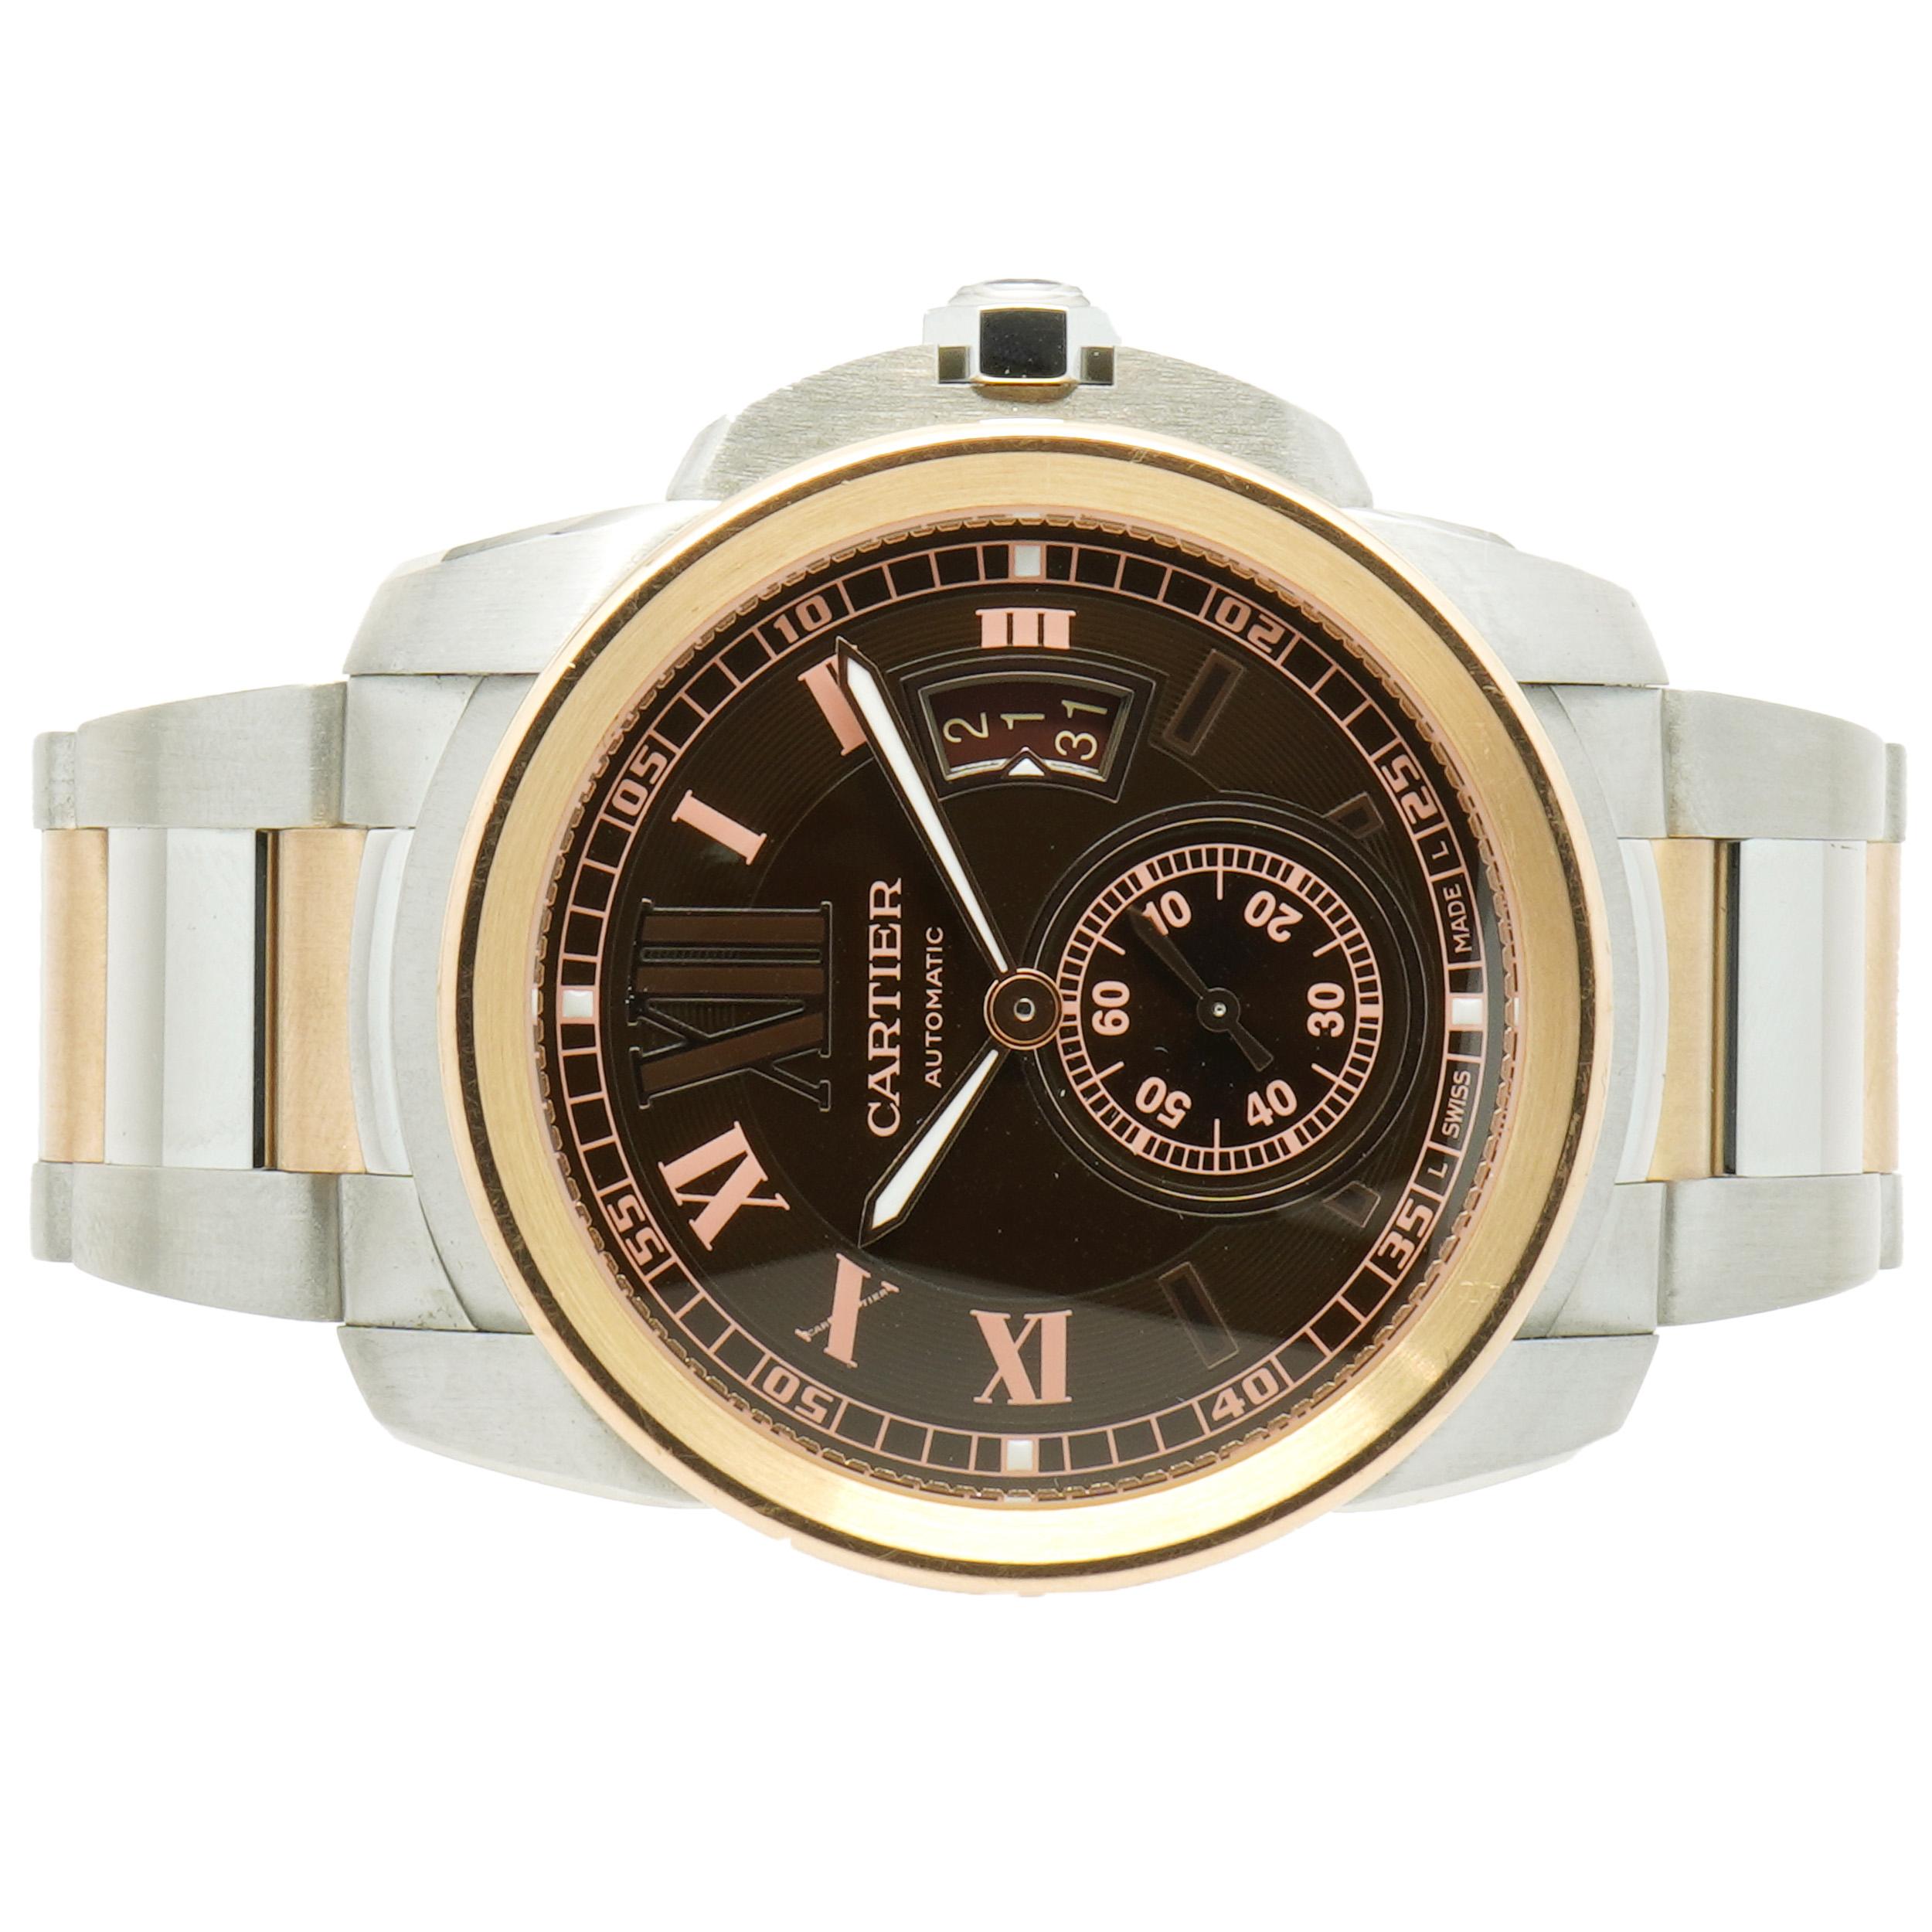 Movement: automatic
Function: hours, minutes, seconds, date
Case: 42mm round case, 18K rose gold bezel, push pull crown, sapphire crystal
Dial: black / rose roman
Band: steel and rose gold bracelet
Serial #: 42552XXX
Reference: 3389

Does not come